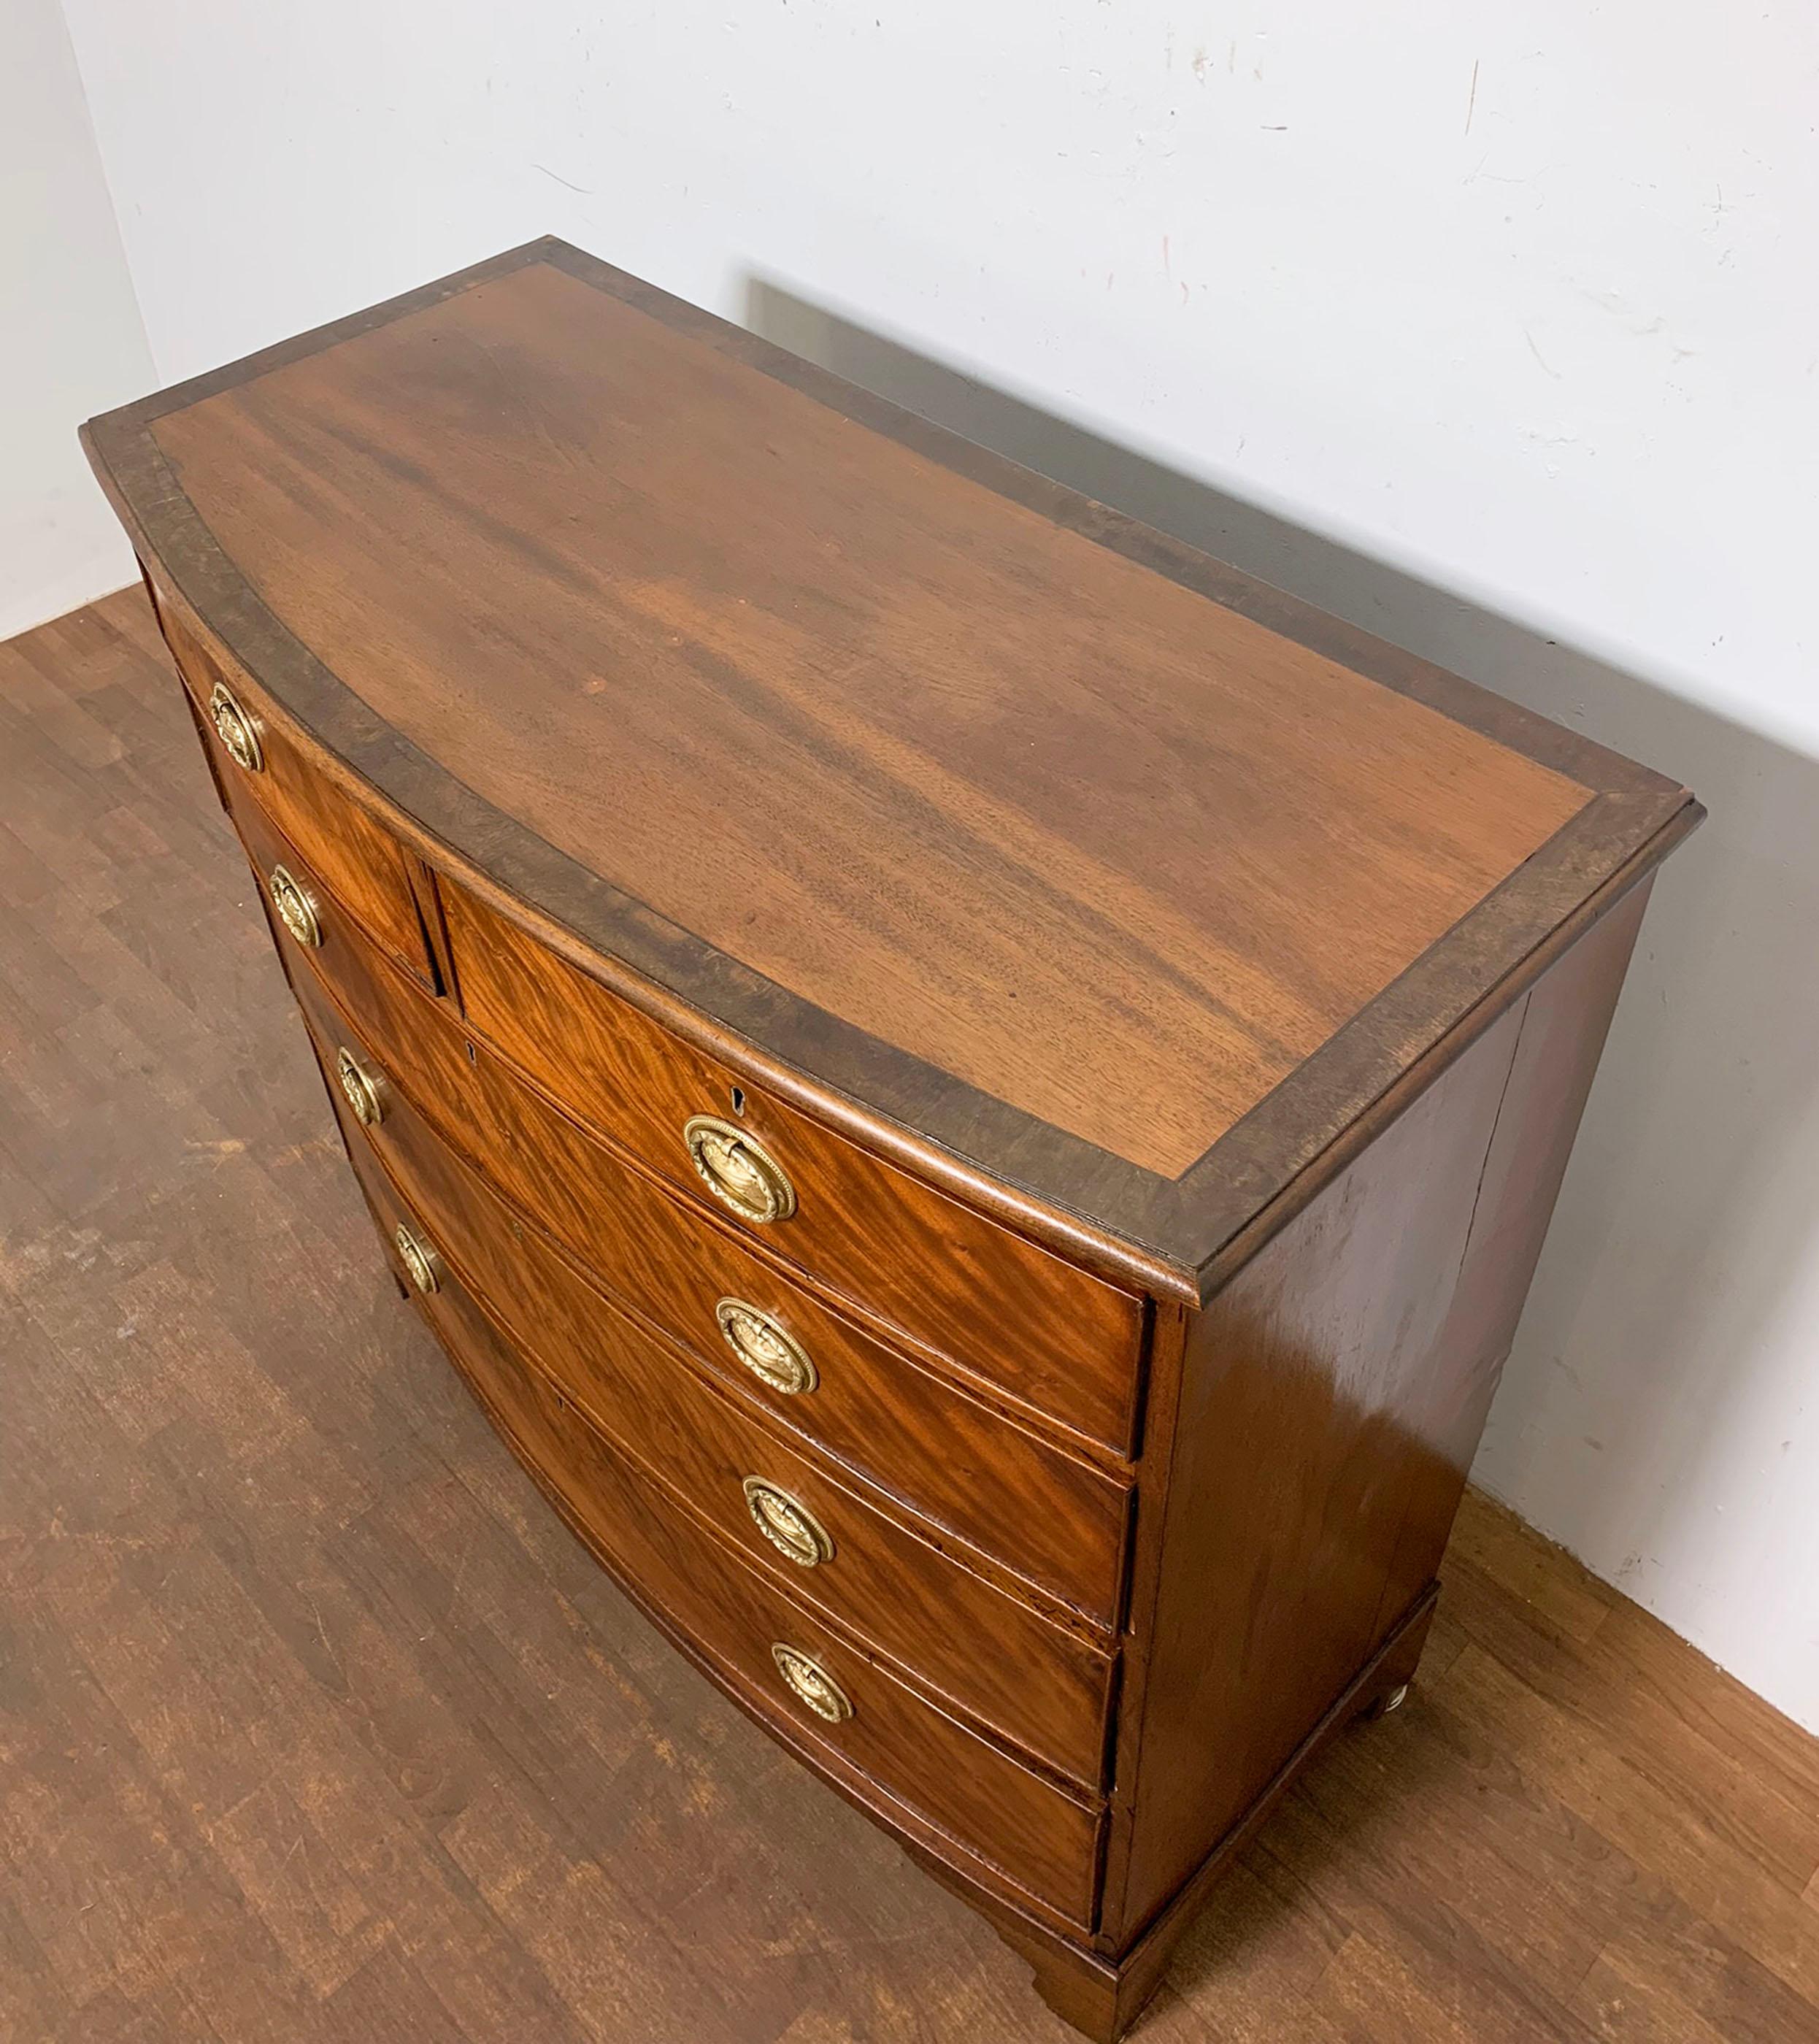 British Antique Ca. 1800 English Bow Front Chest in Flame Mahogany